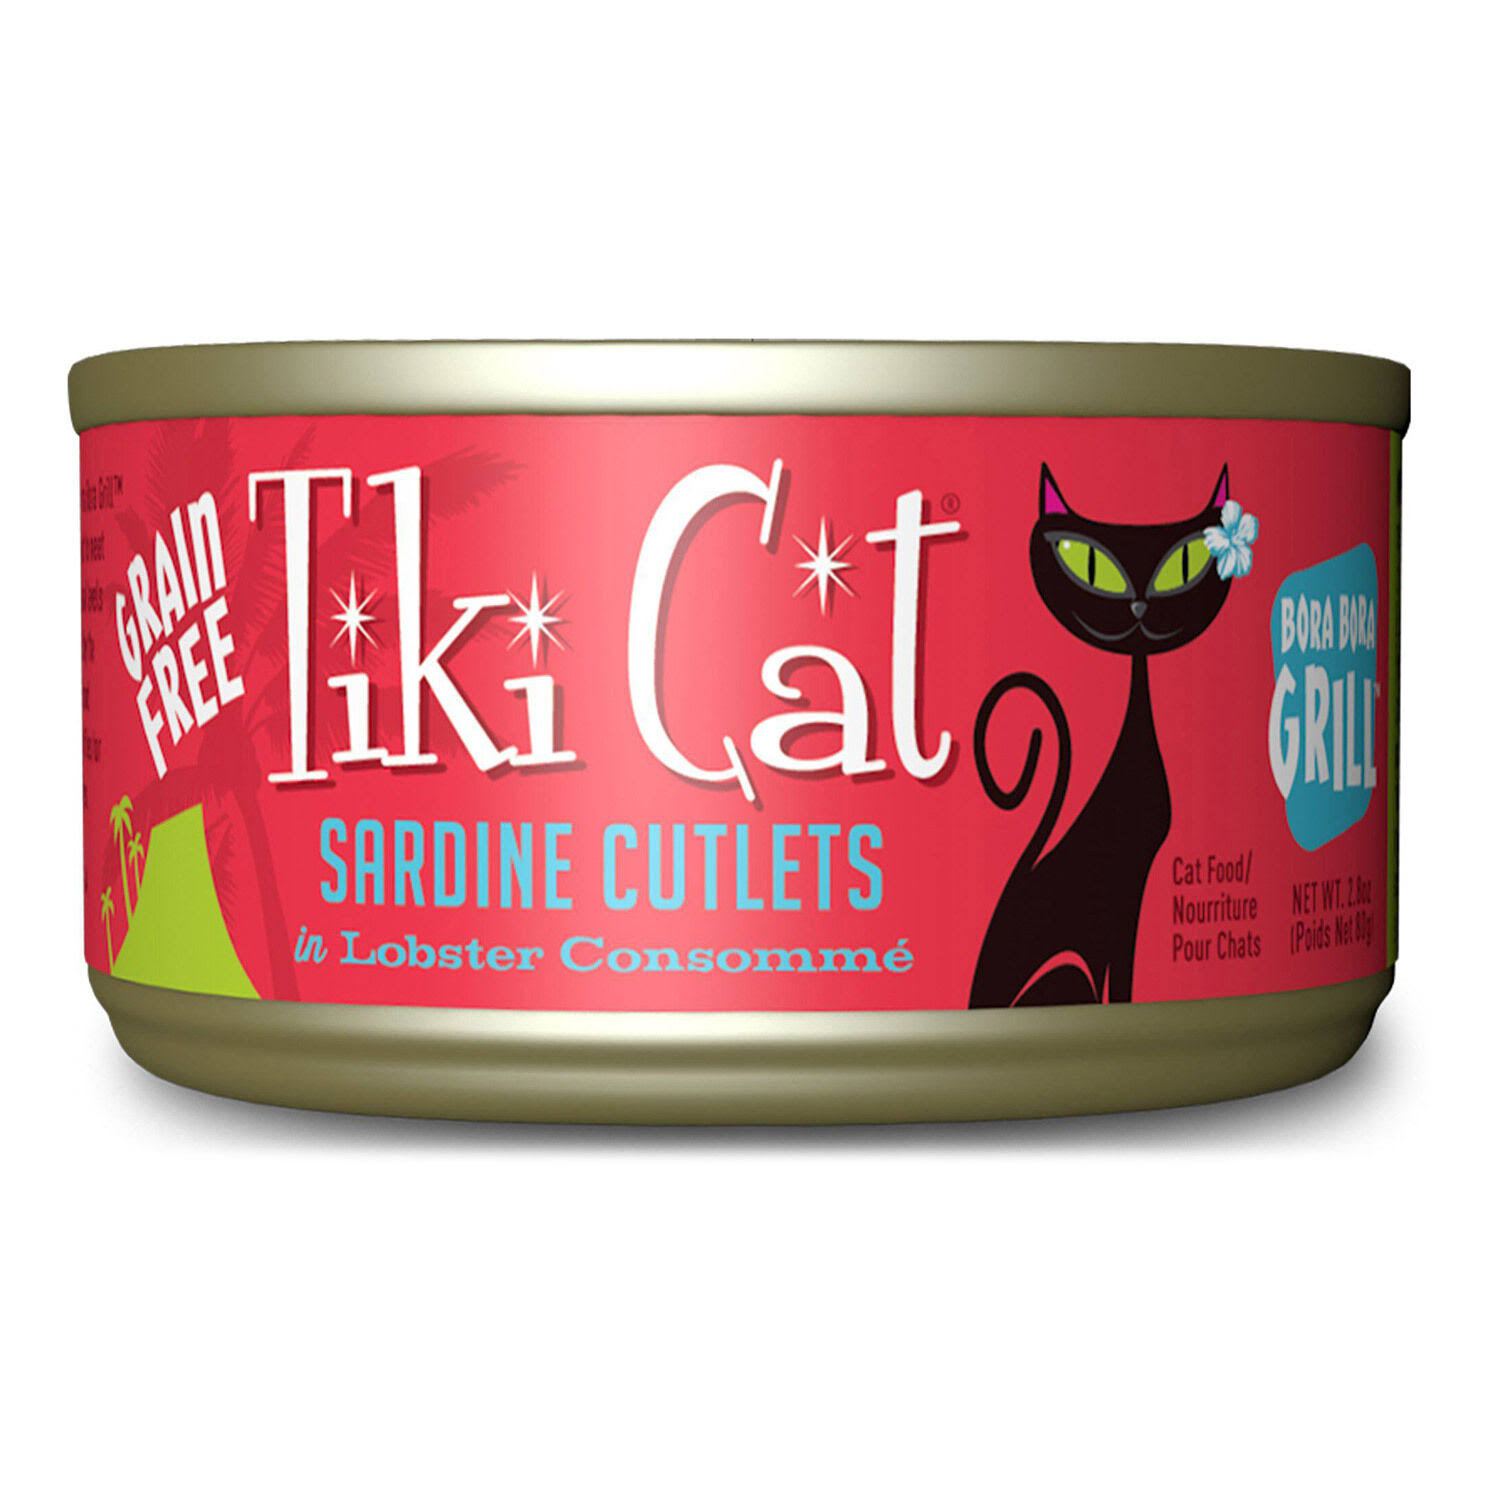 Tiki Cat Grill Bora Bora Sardine Cutlets in Lobster Consomme Canned Cat Food, 2.8-oz